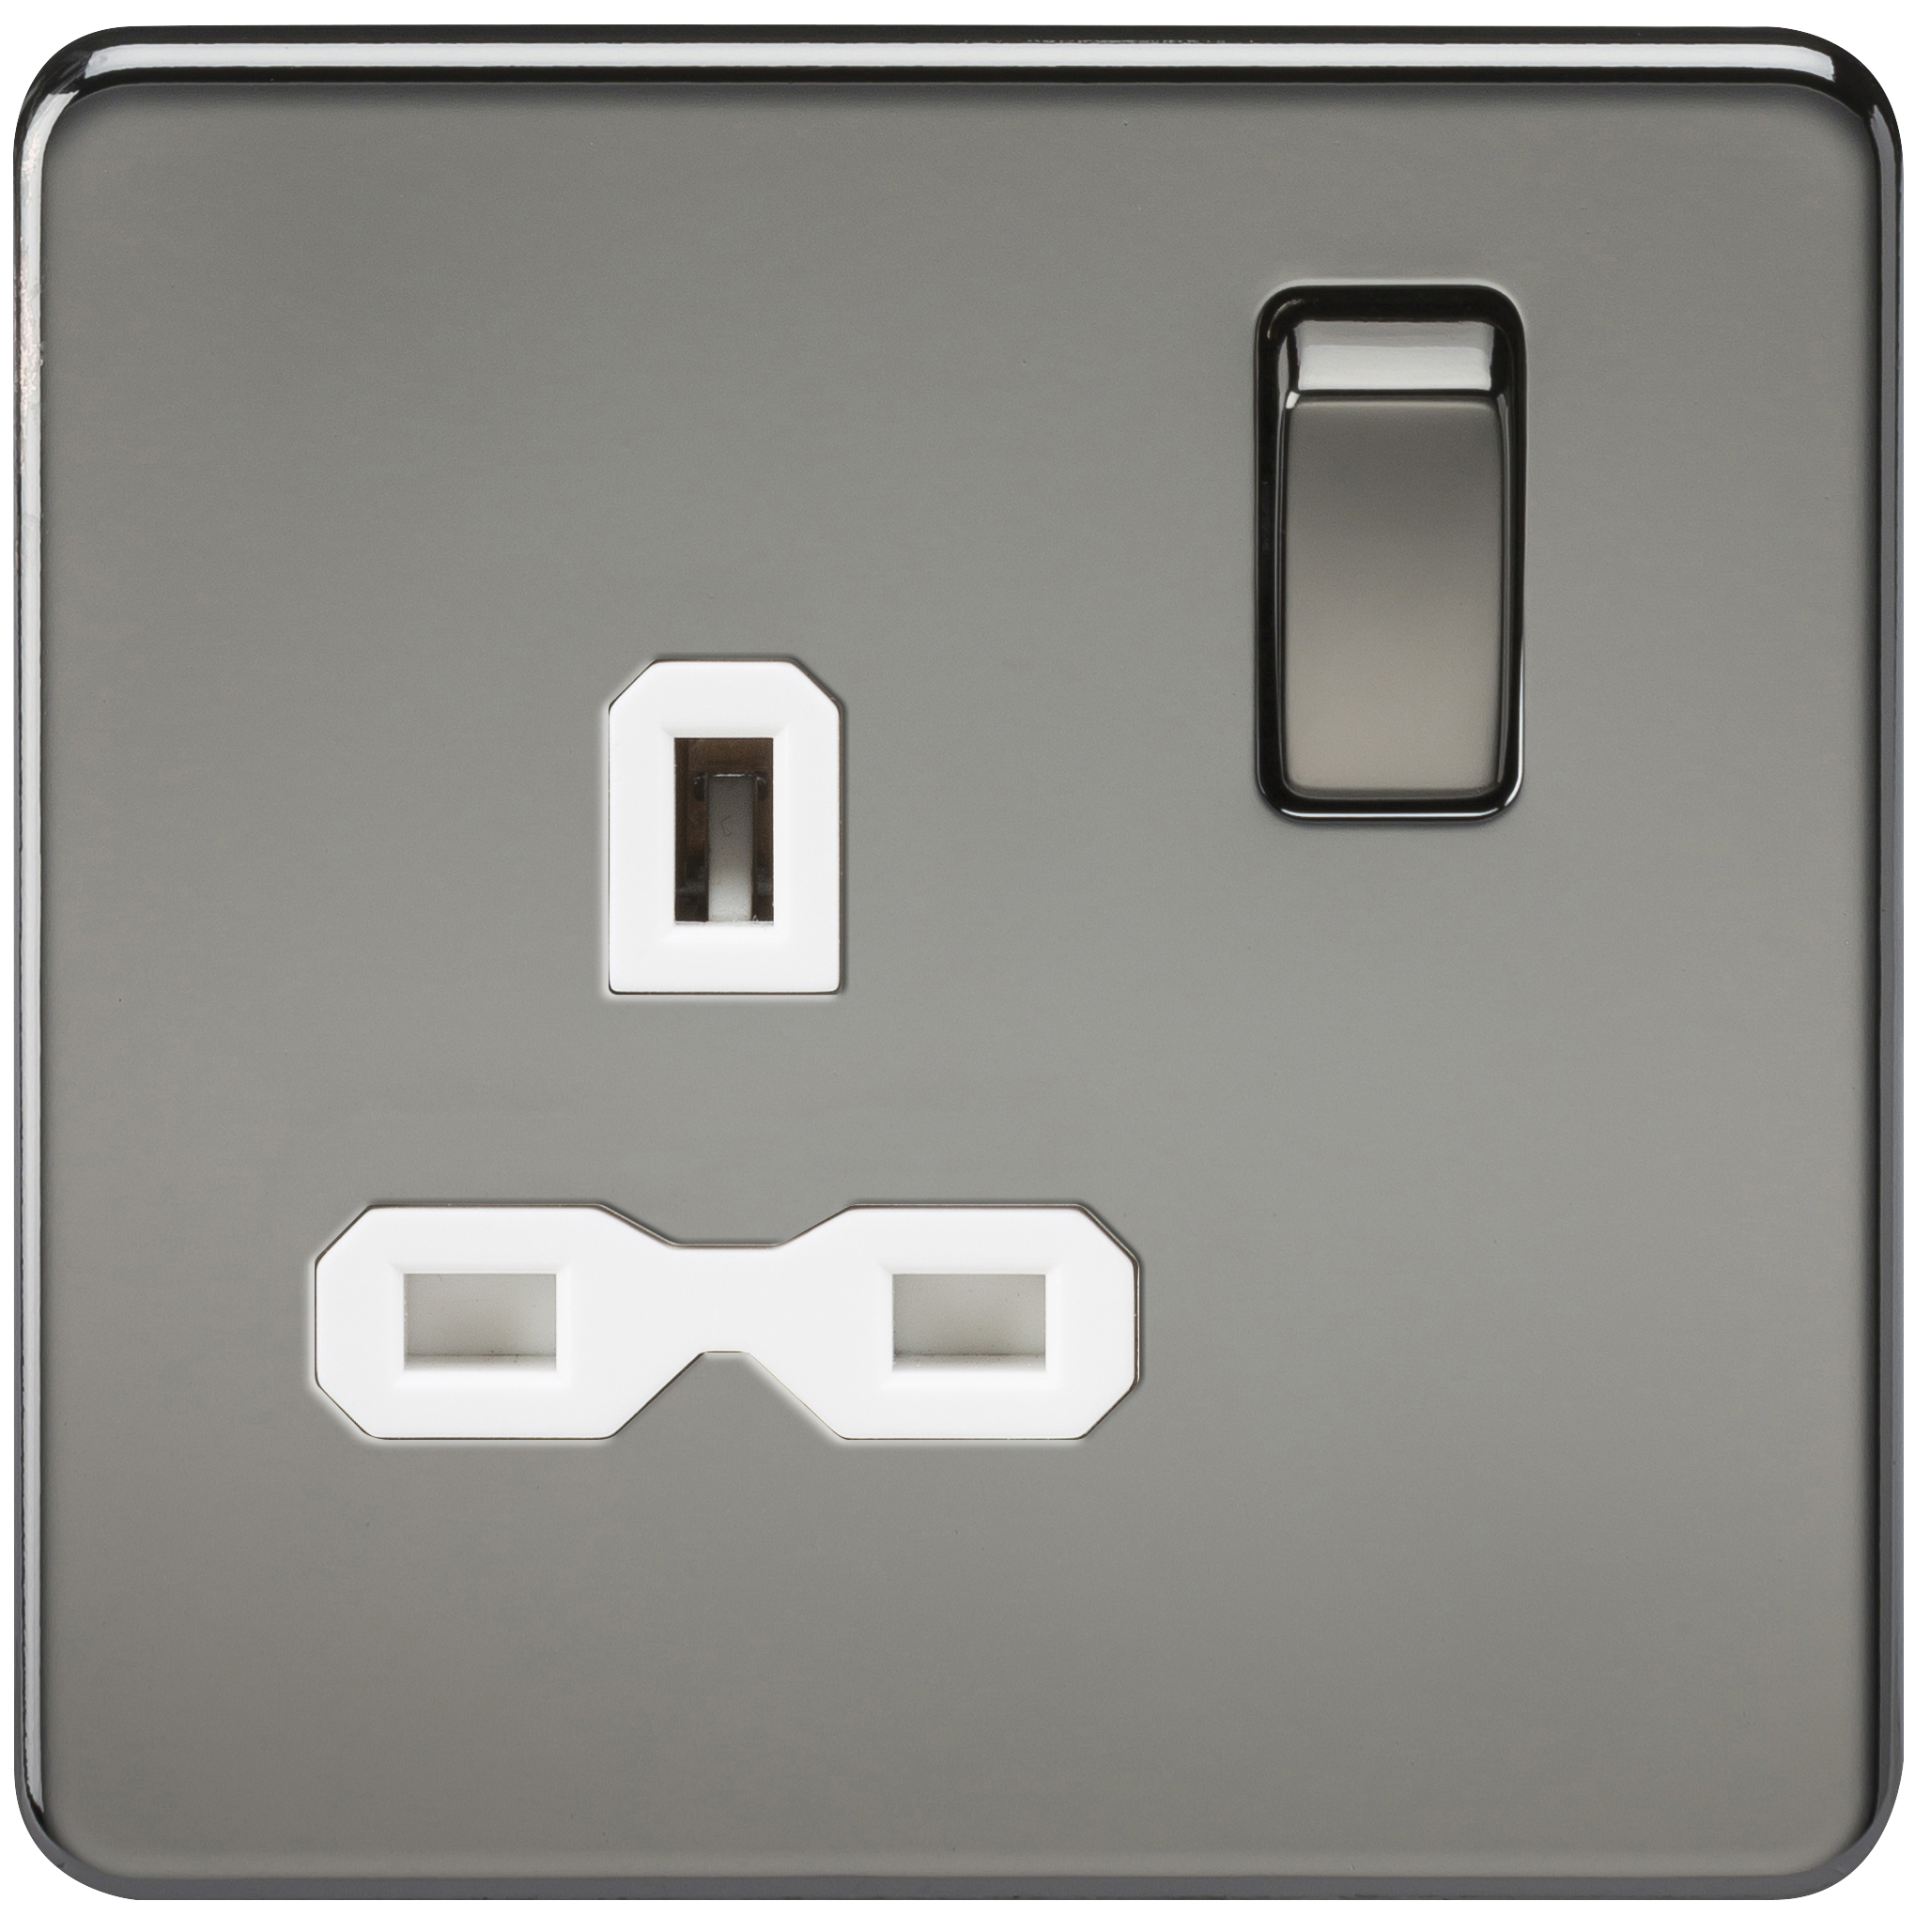 Screwless 13A 1G DP Switched Socket - Black Nickel With White Insert - SFR7000BNW 